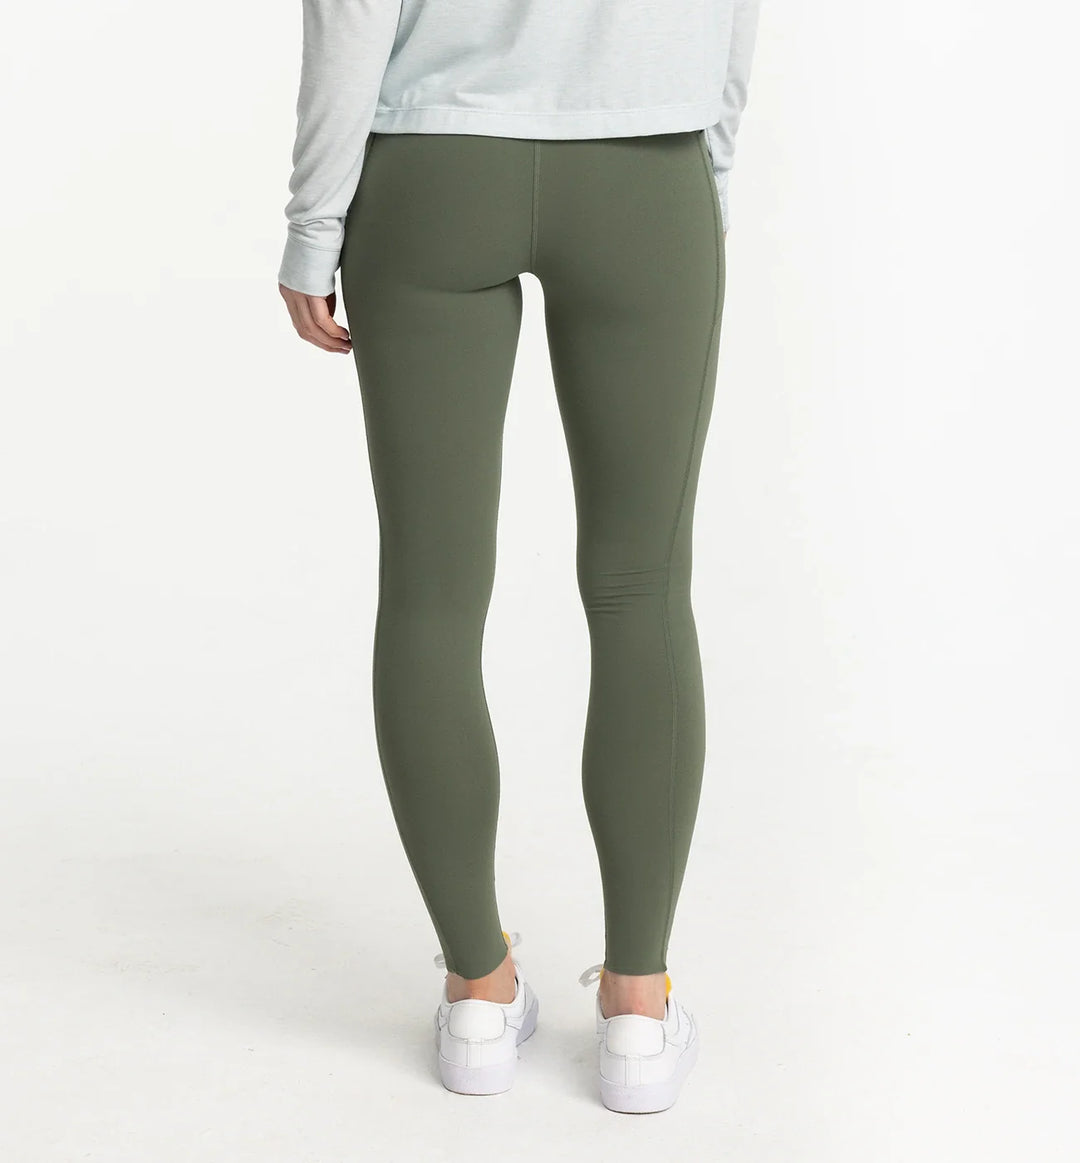 Free Fly Women's All Day Pocket Legging - AGAVE GREEN - Sun Diego Boardshop